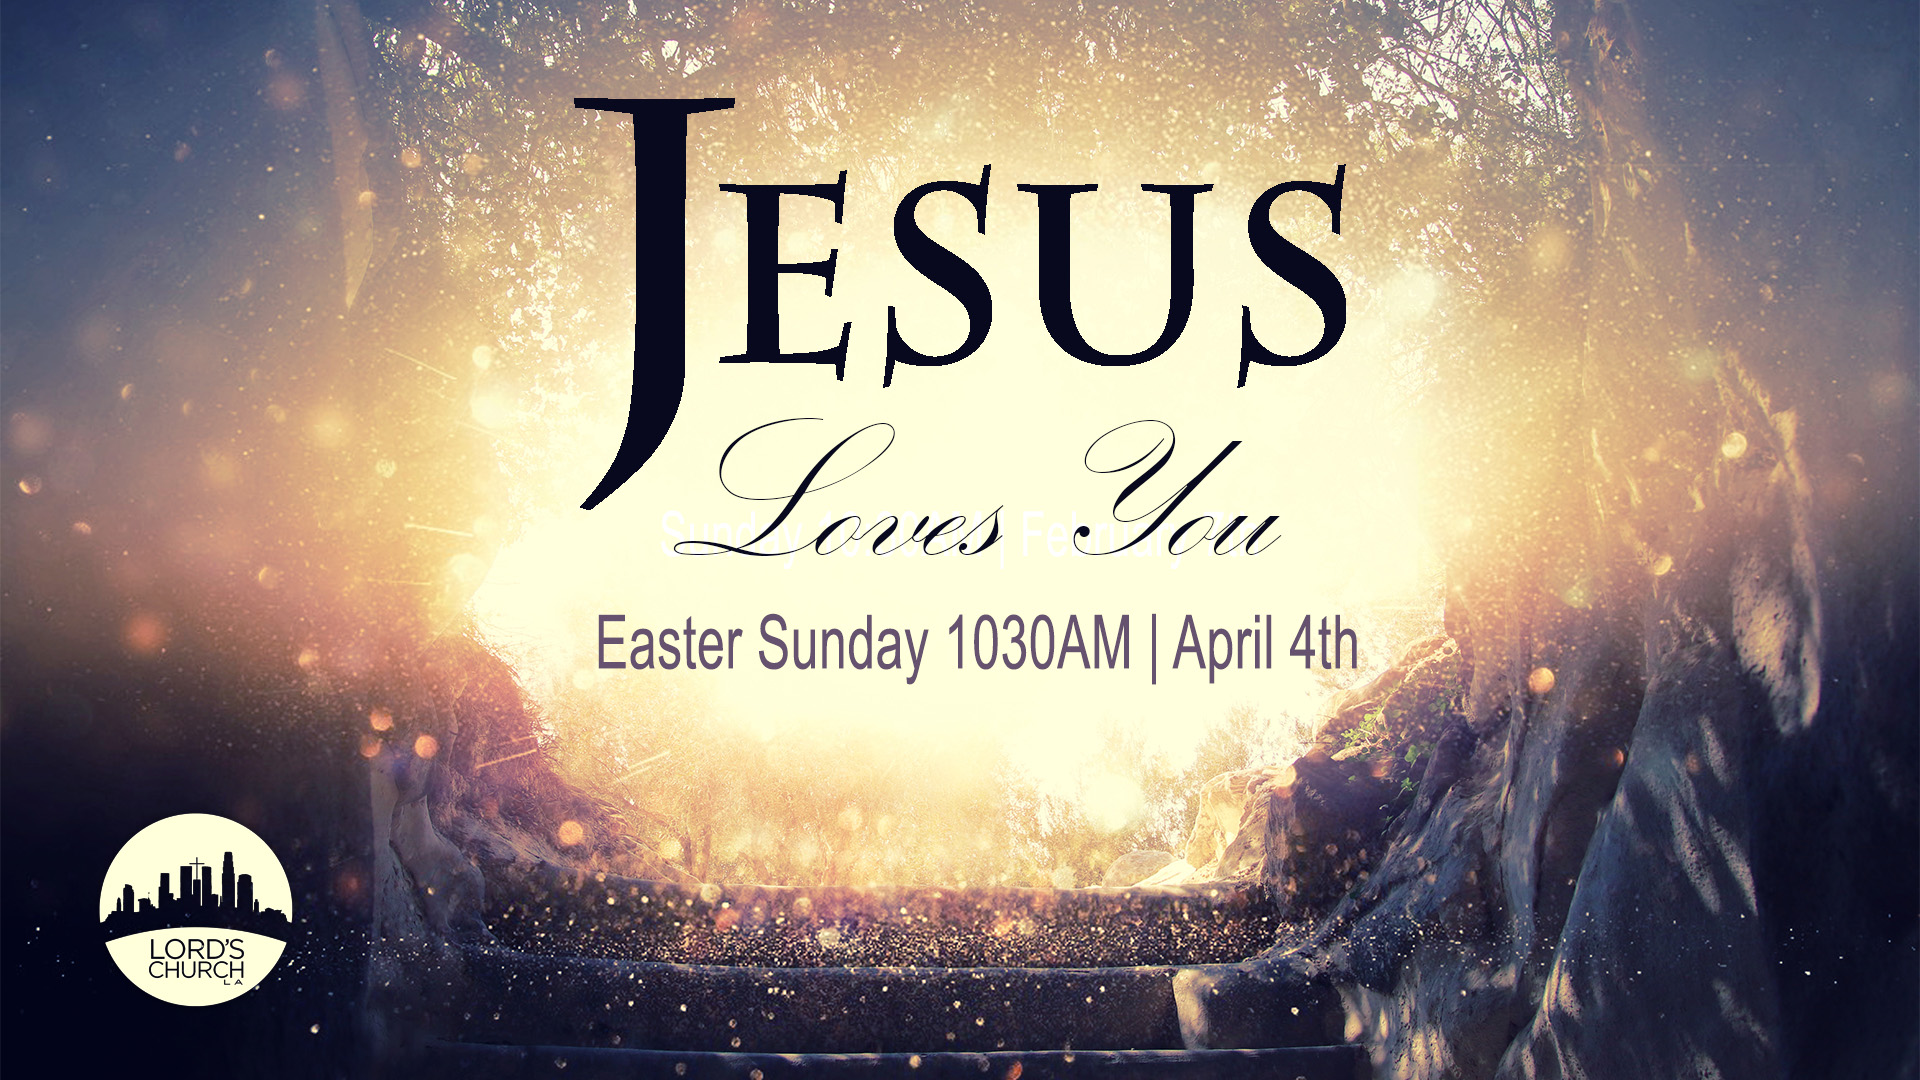 Lord's Church LA | Easter Sunday 2021: Jesus Loves You